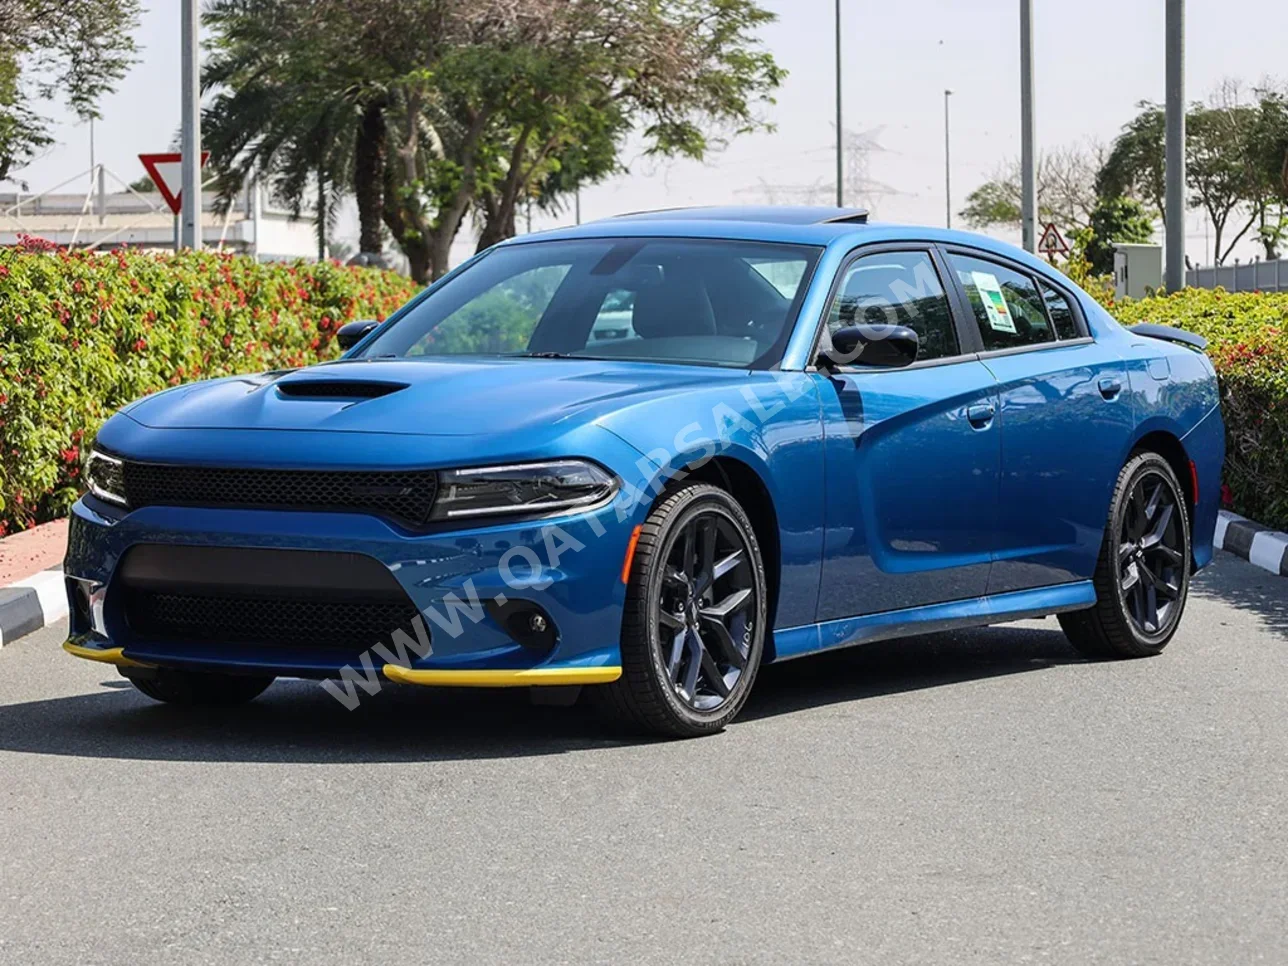 Dodge  Charger  GT  2023  Automatic  0 Km  6 Cylinder  Rear Wheel Drive (RWD)  Sedan  Blue  With Warranty